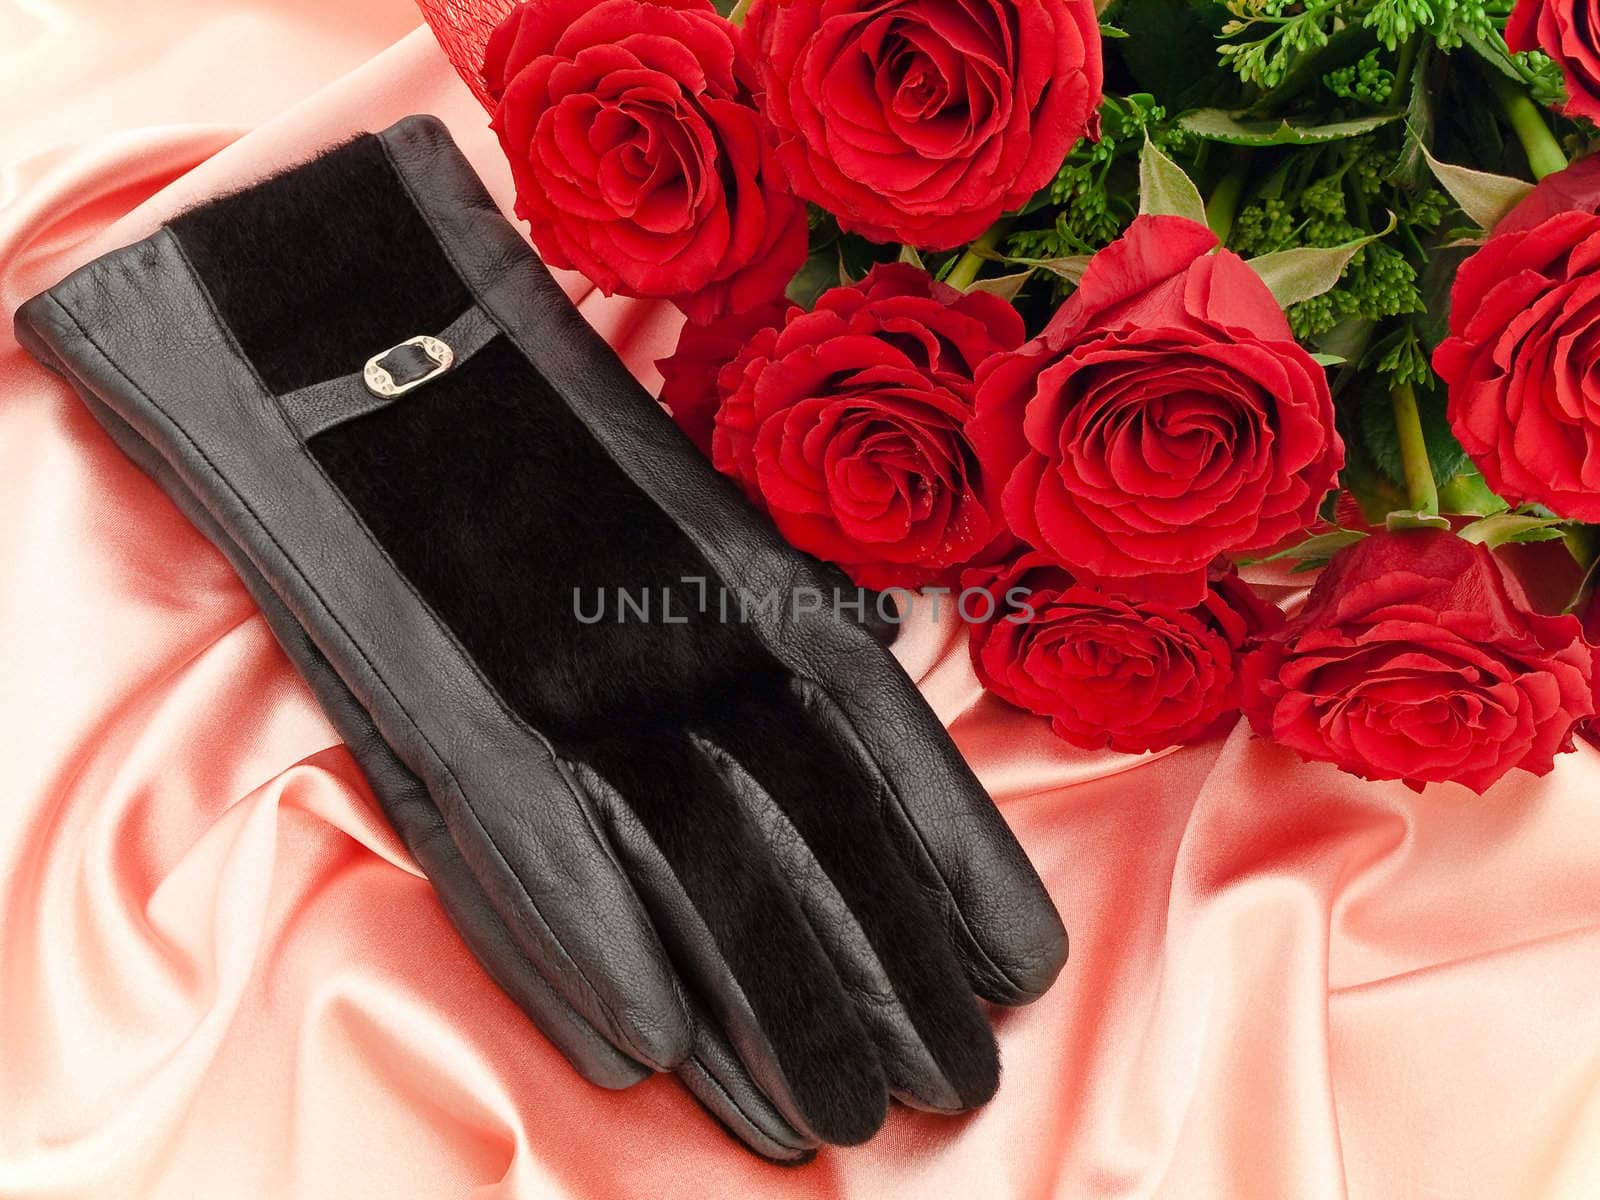 Red roses and gloves by SNR